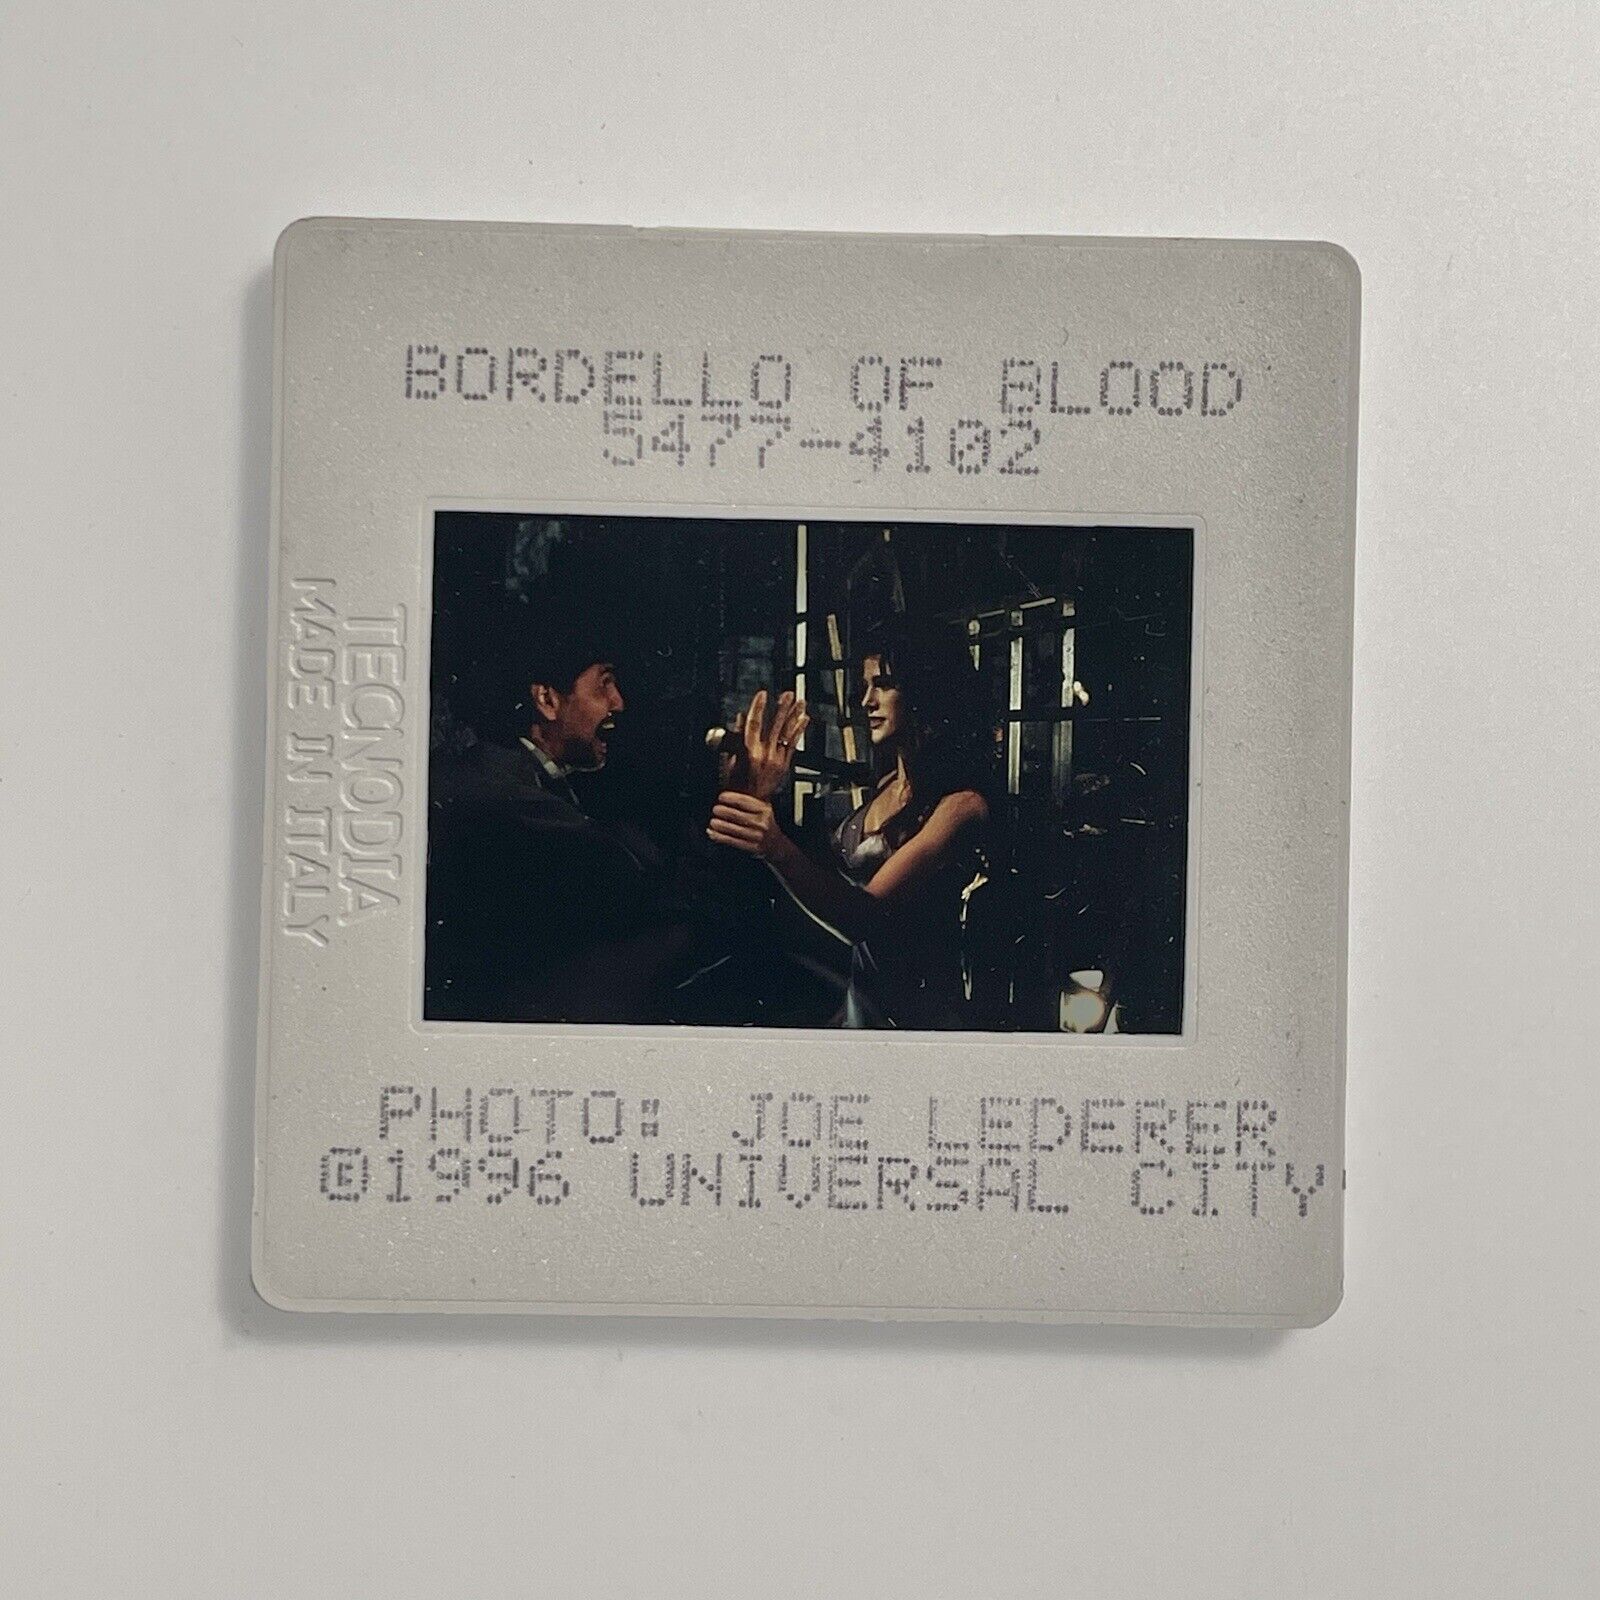 Actress  Angie Everhart  In Bordello of Blood S23408  SD10 Vintage 35mm Slide